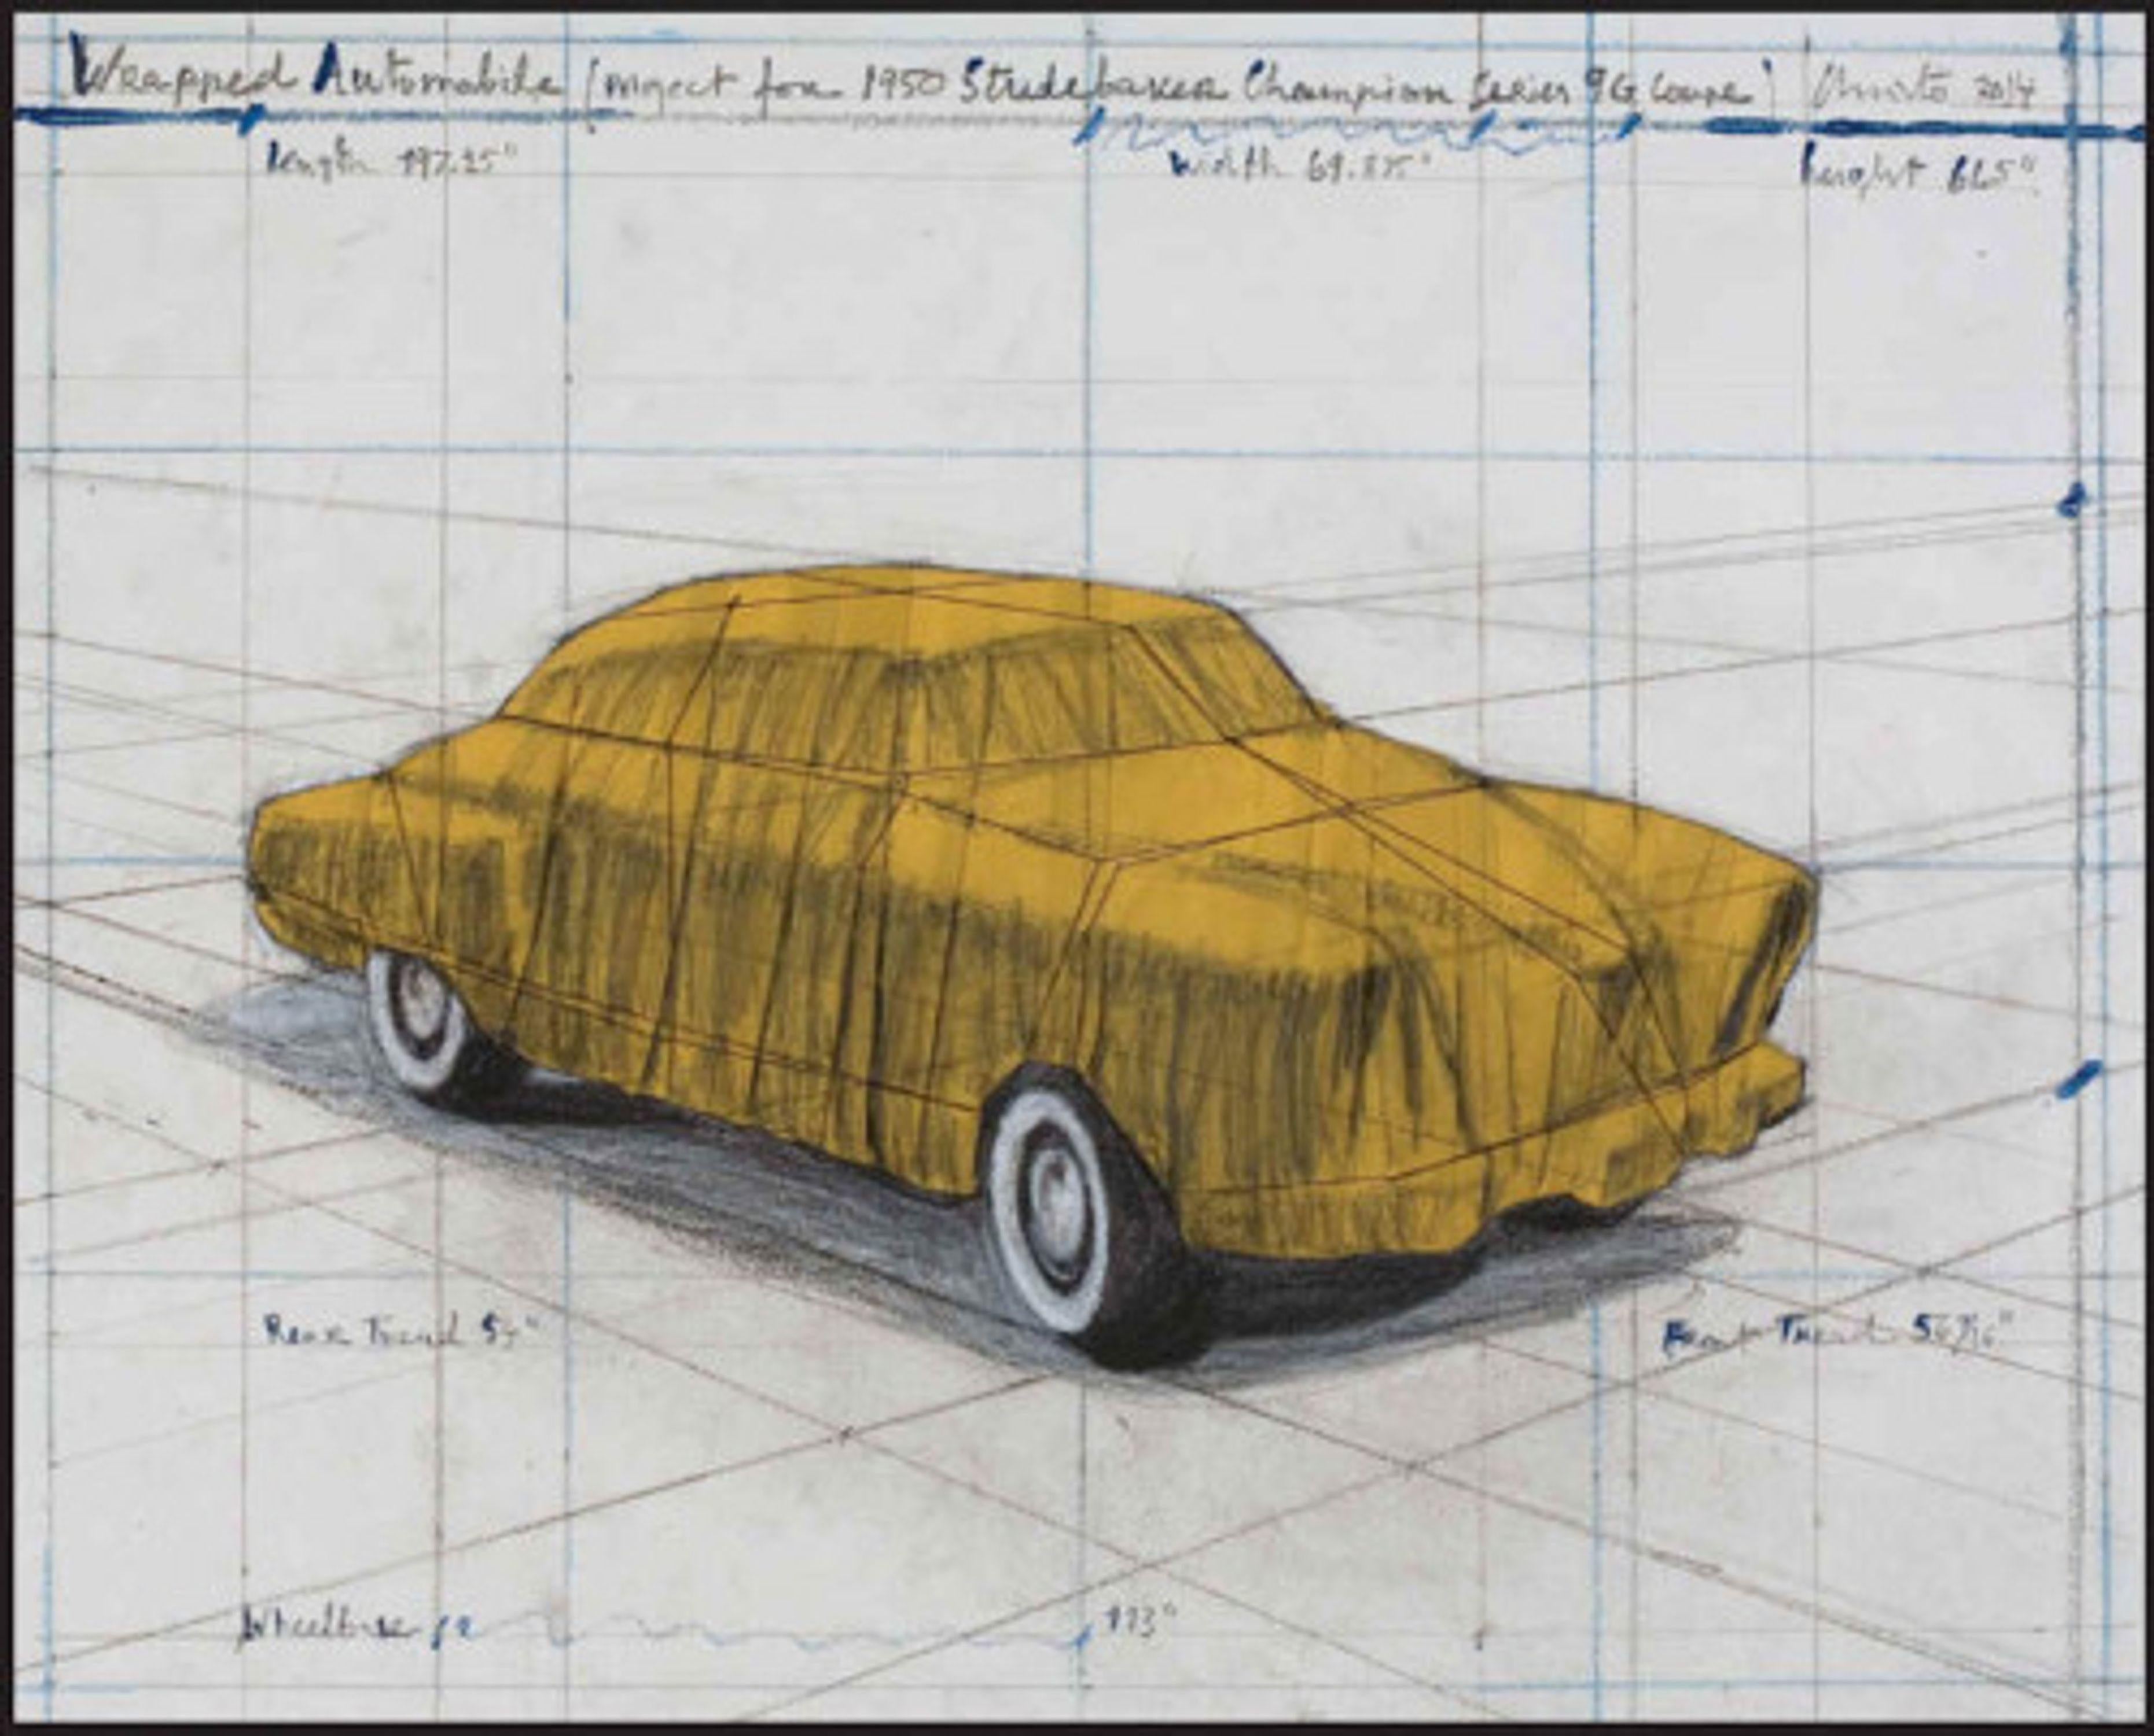 Wrapped Automobile, Project for Studebaker